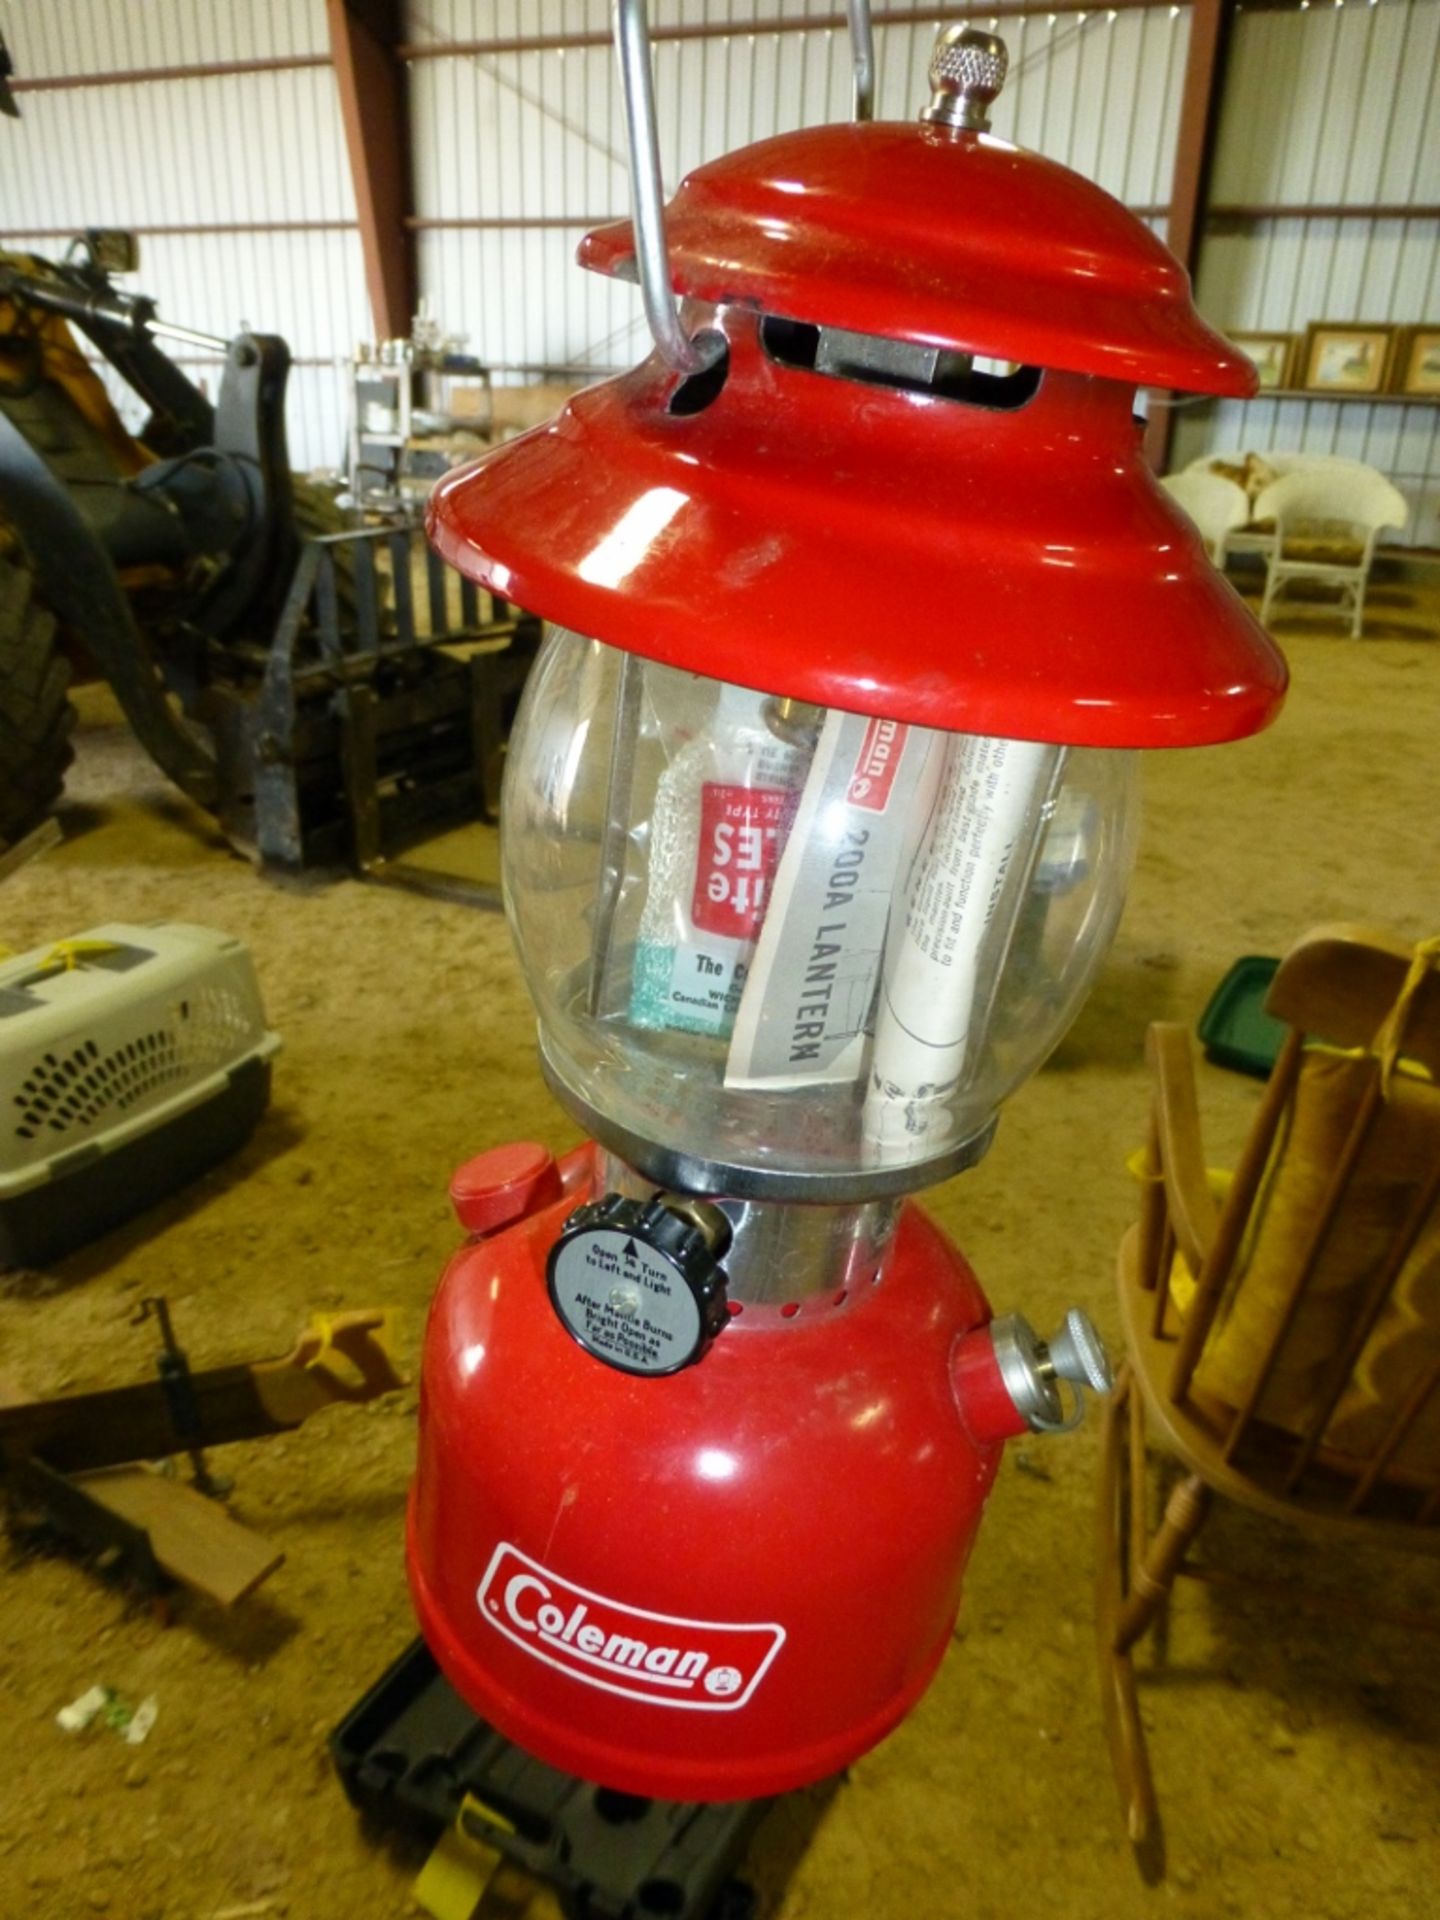 Rubber tote with Coleman camp supplies, propane stove, tanks, tripod, lantern, camp fuel!